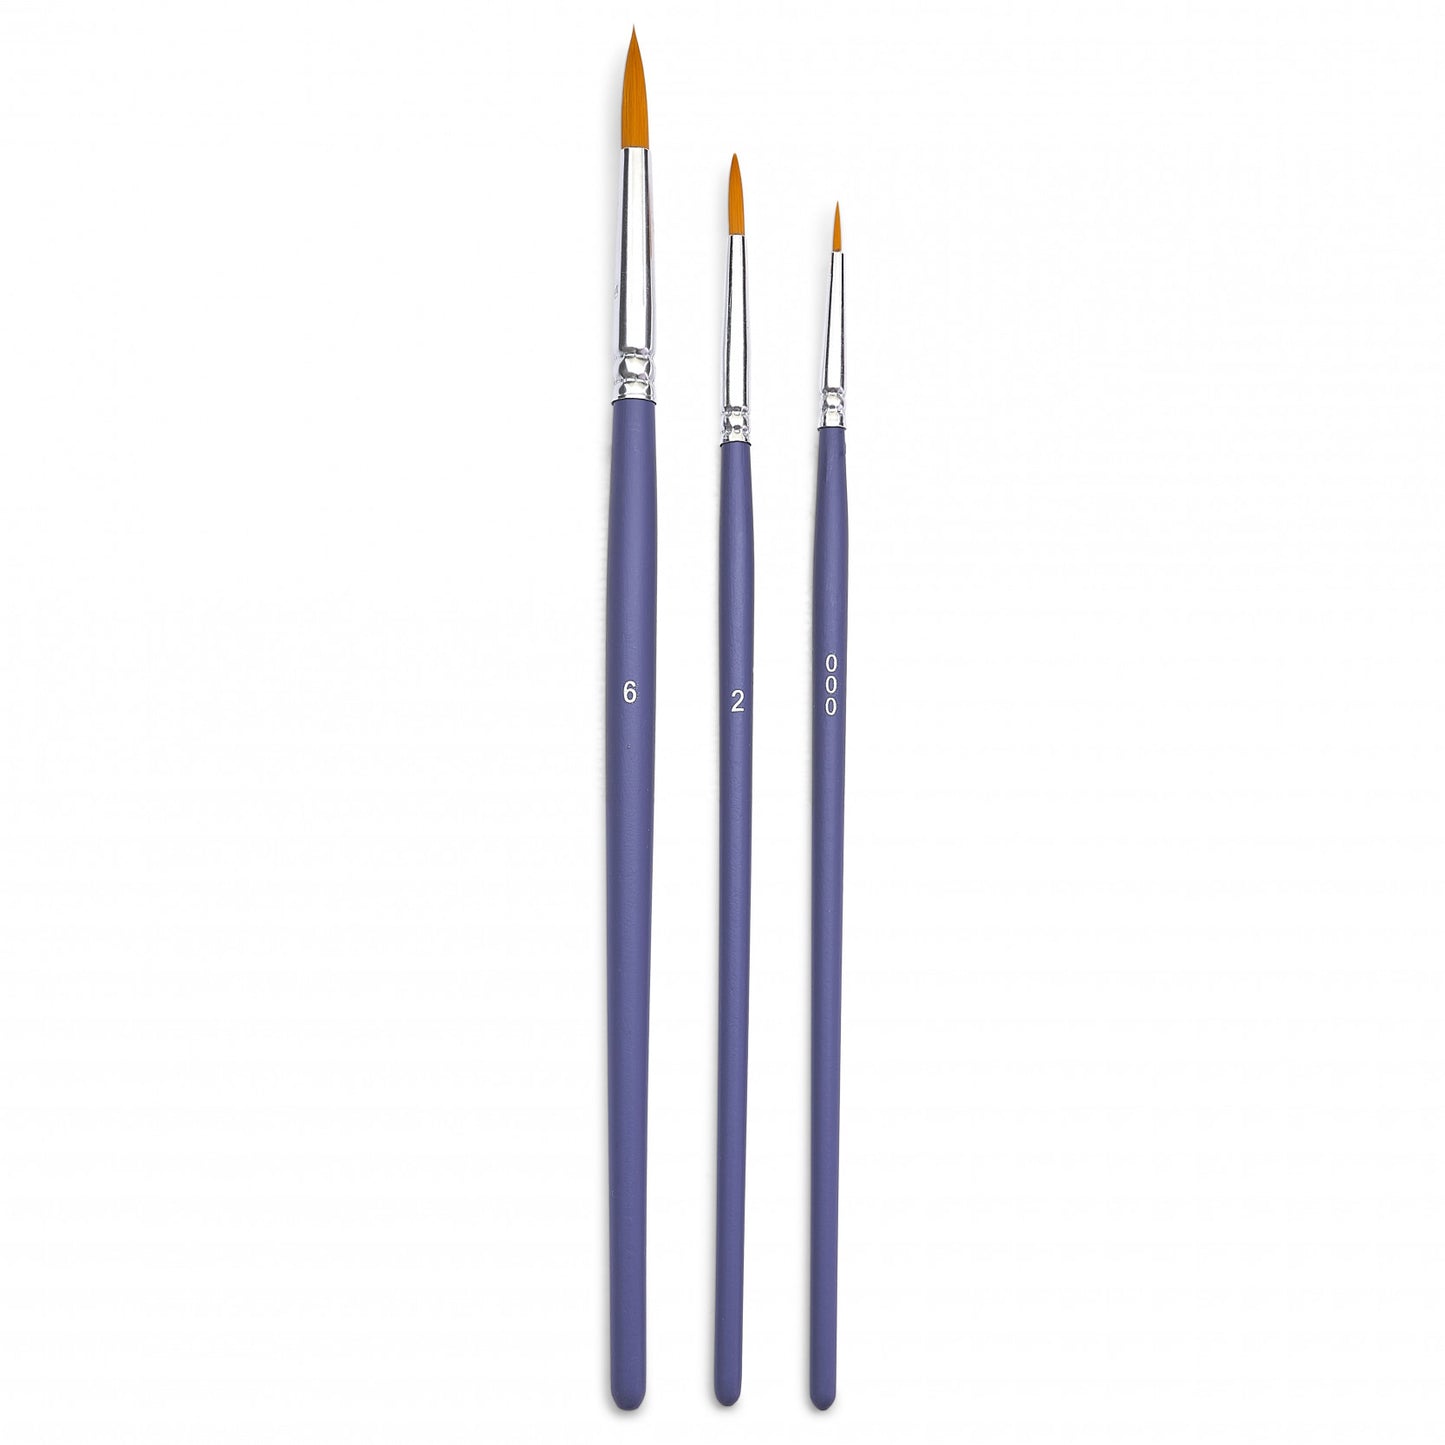 Set of 3 round brushes with short handle